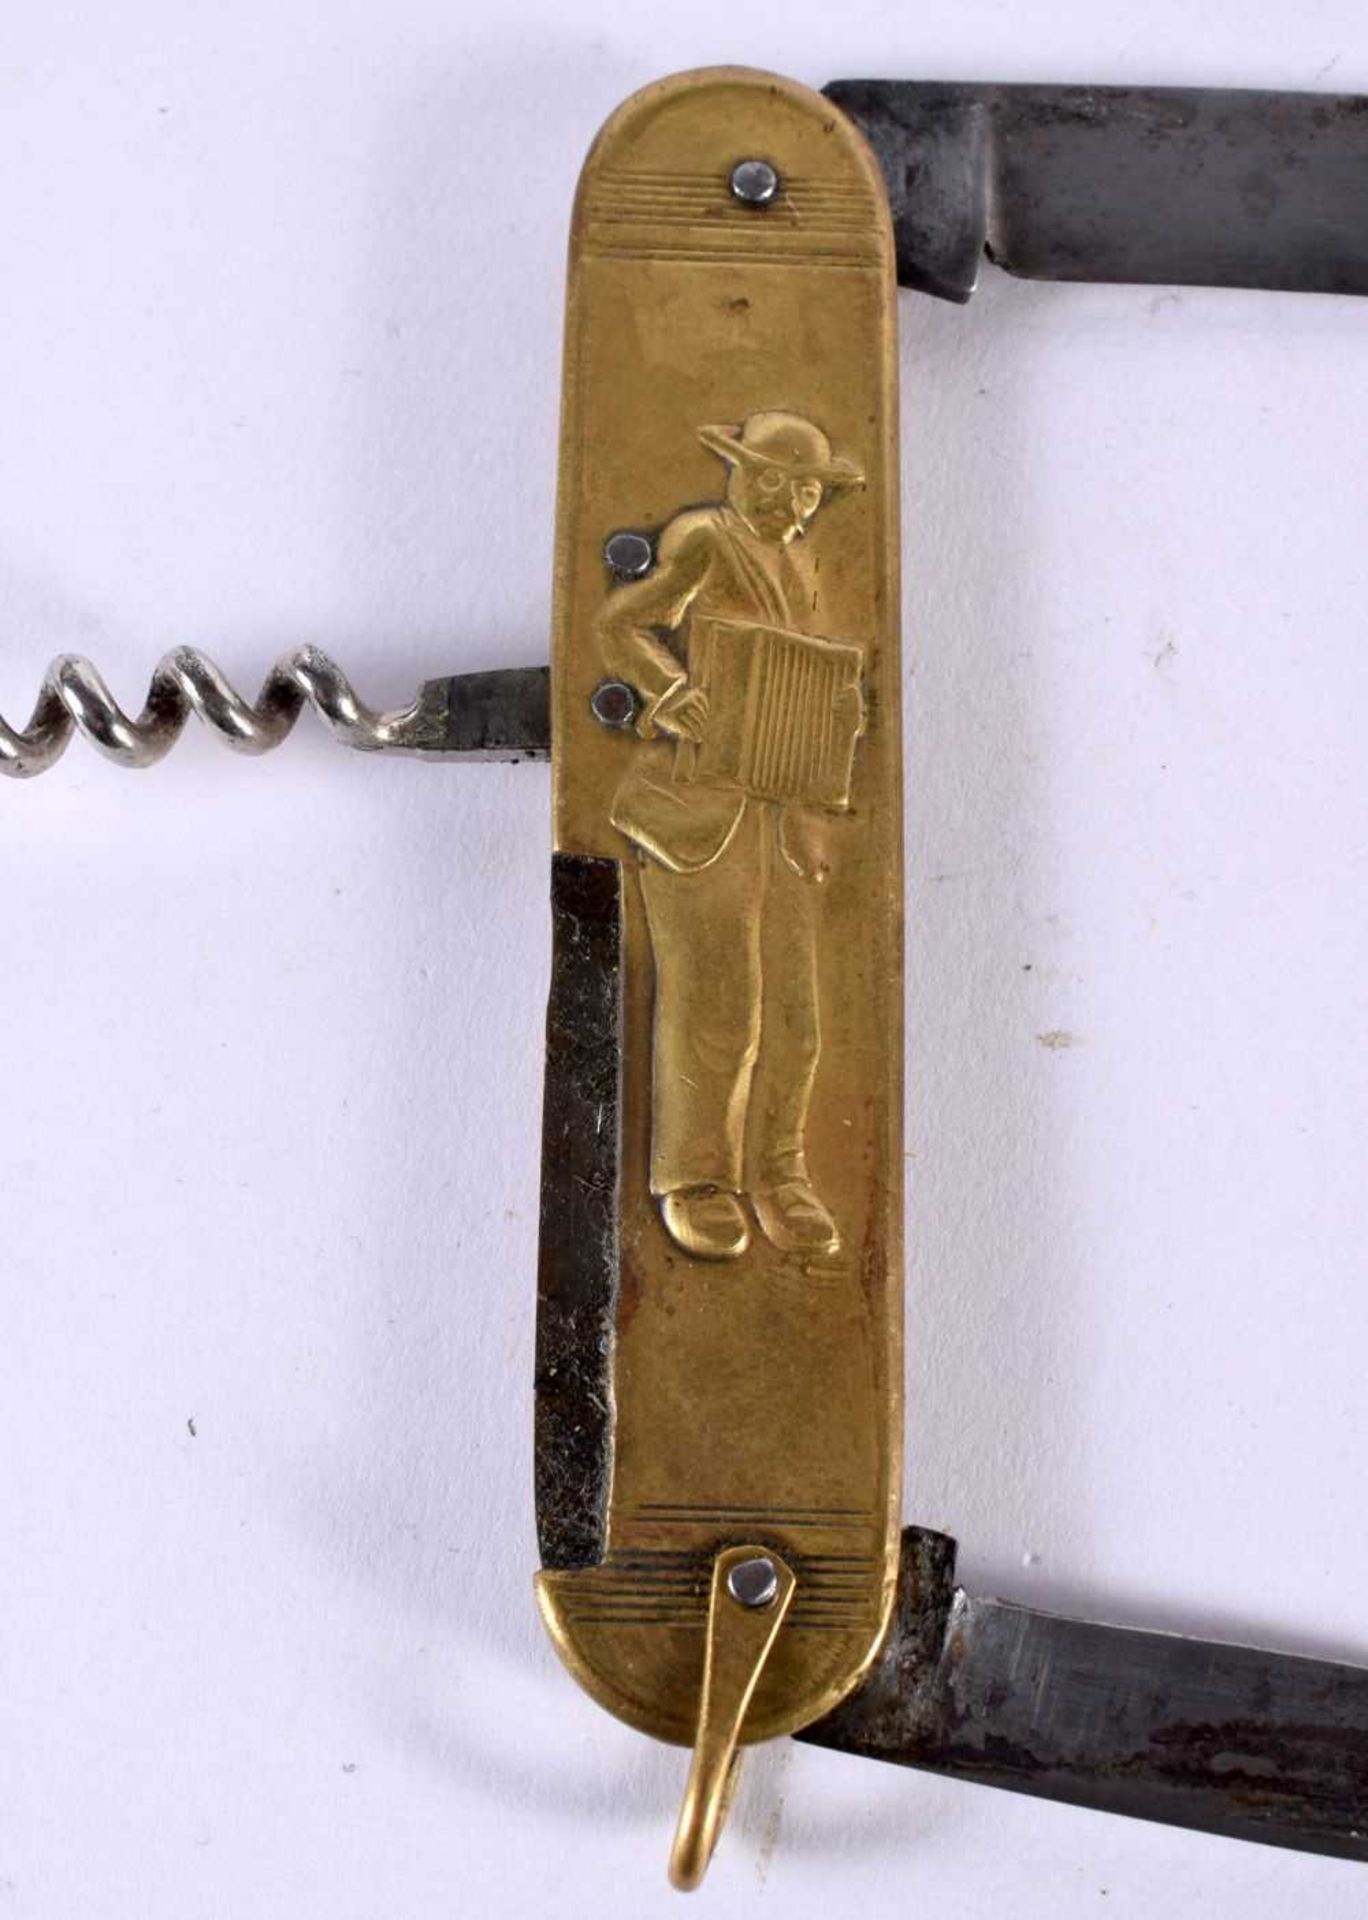 AN UNUSUAL ANTIQUE BASKETBALL MILITARY SOLDIER POCKET KNIFE. 73 grams. 23 cm long extended. - Image 3 of 3